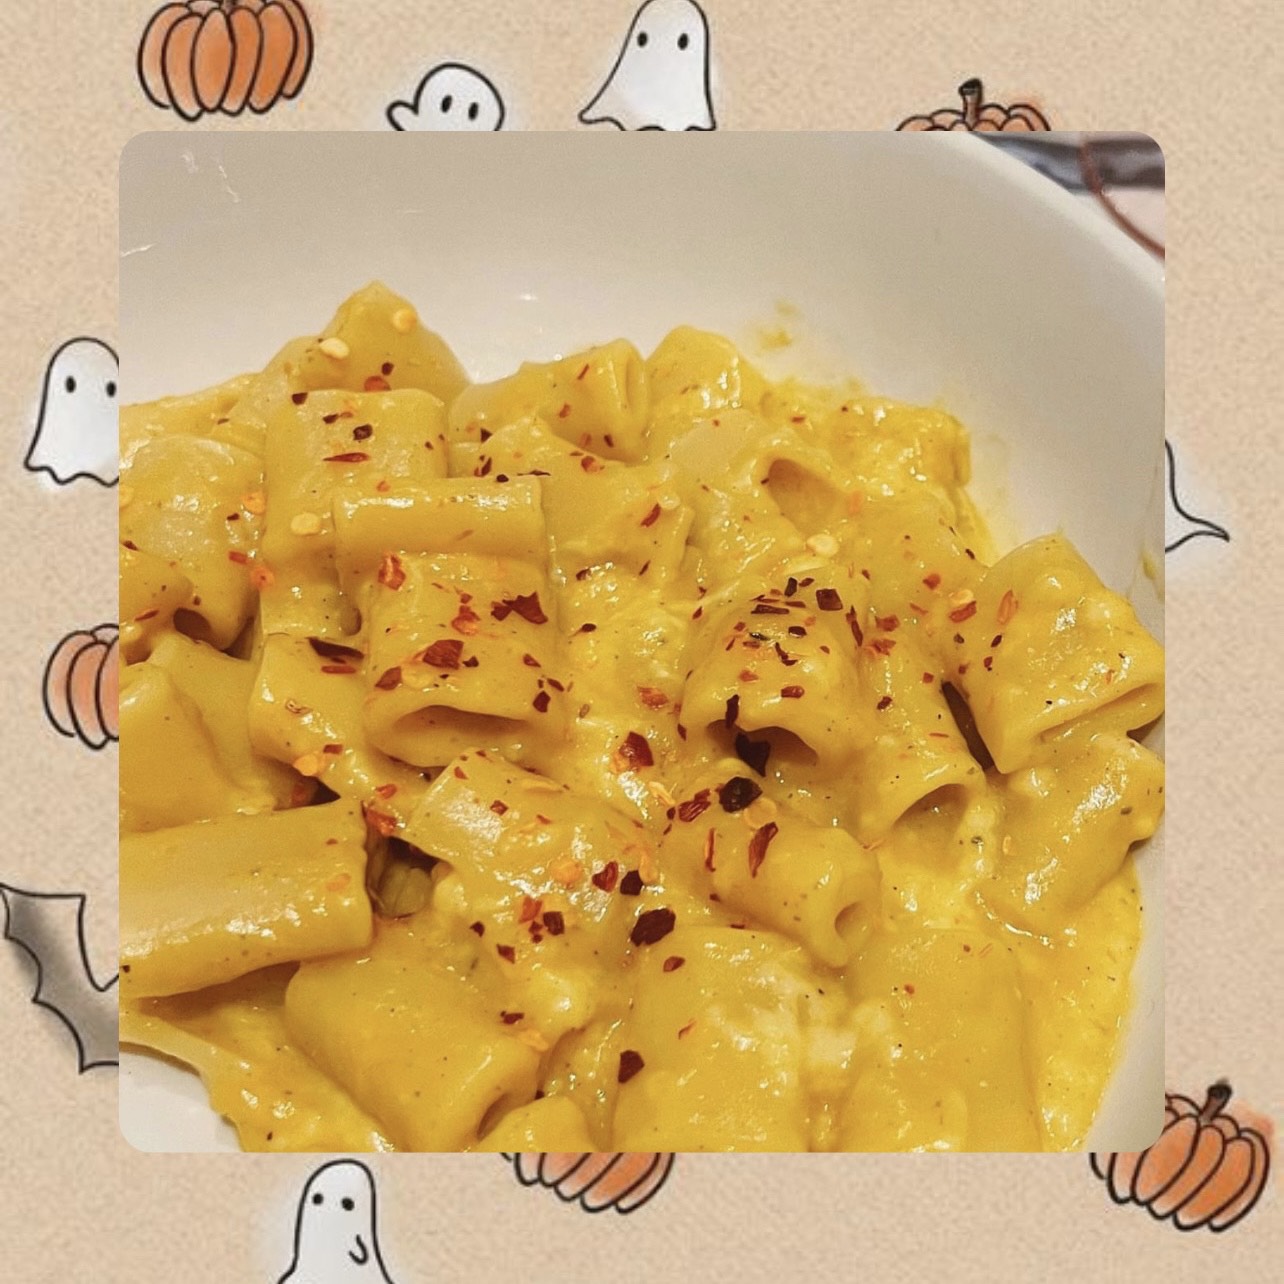 Spicy Caribbee's Spooky Butternut Squash Mac and Cheese Recipe